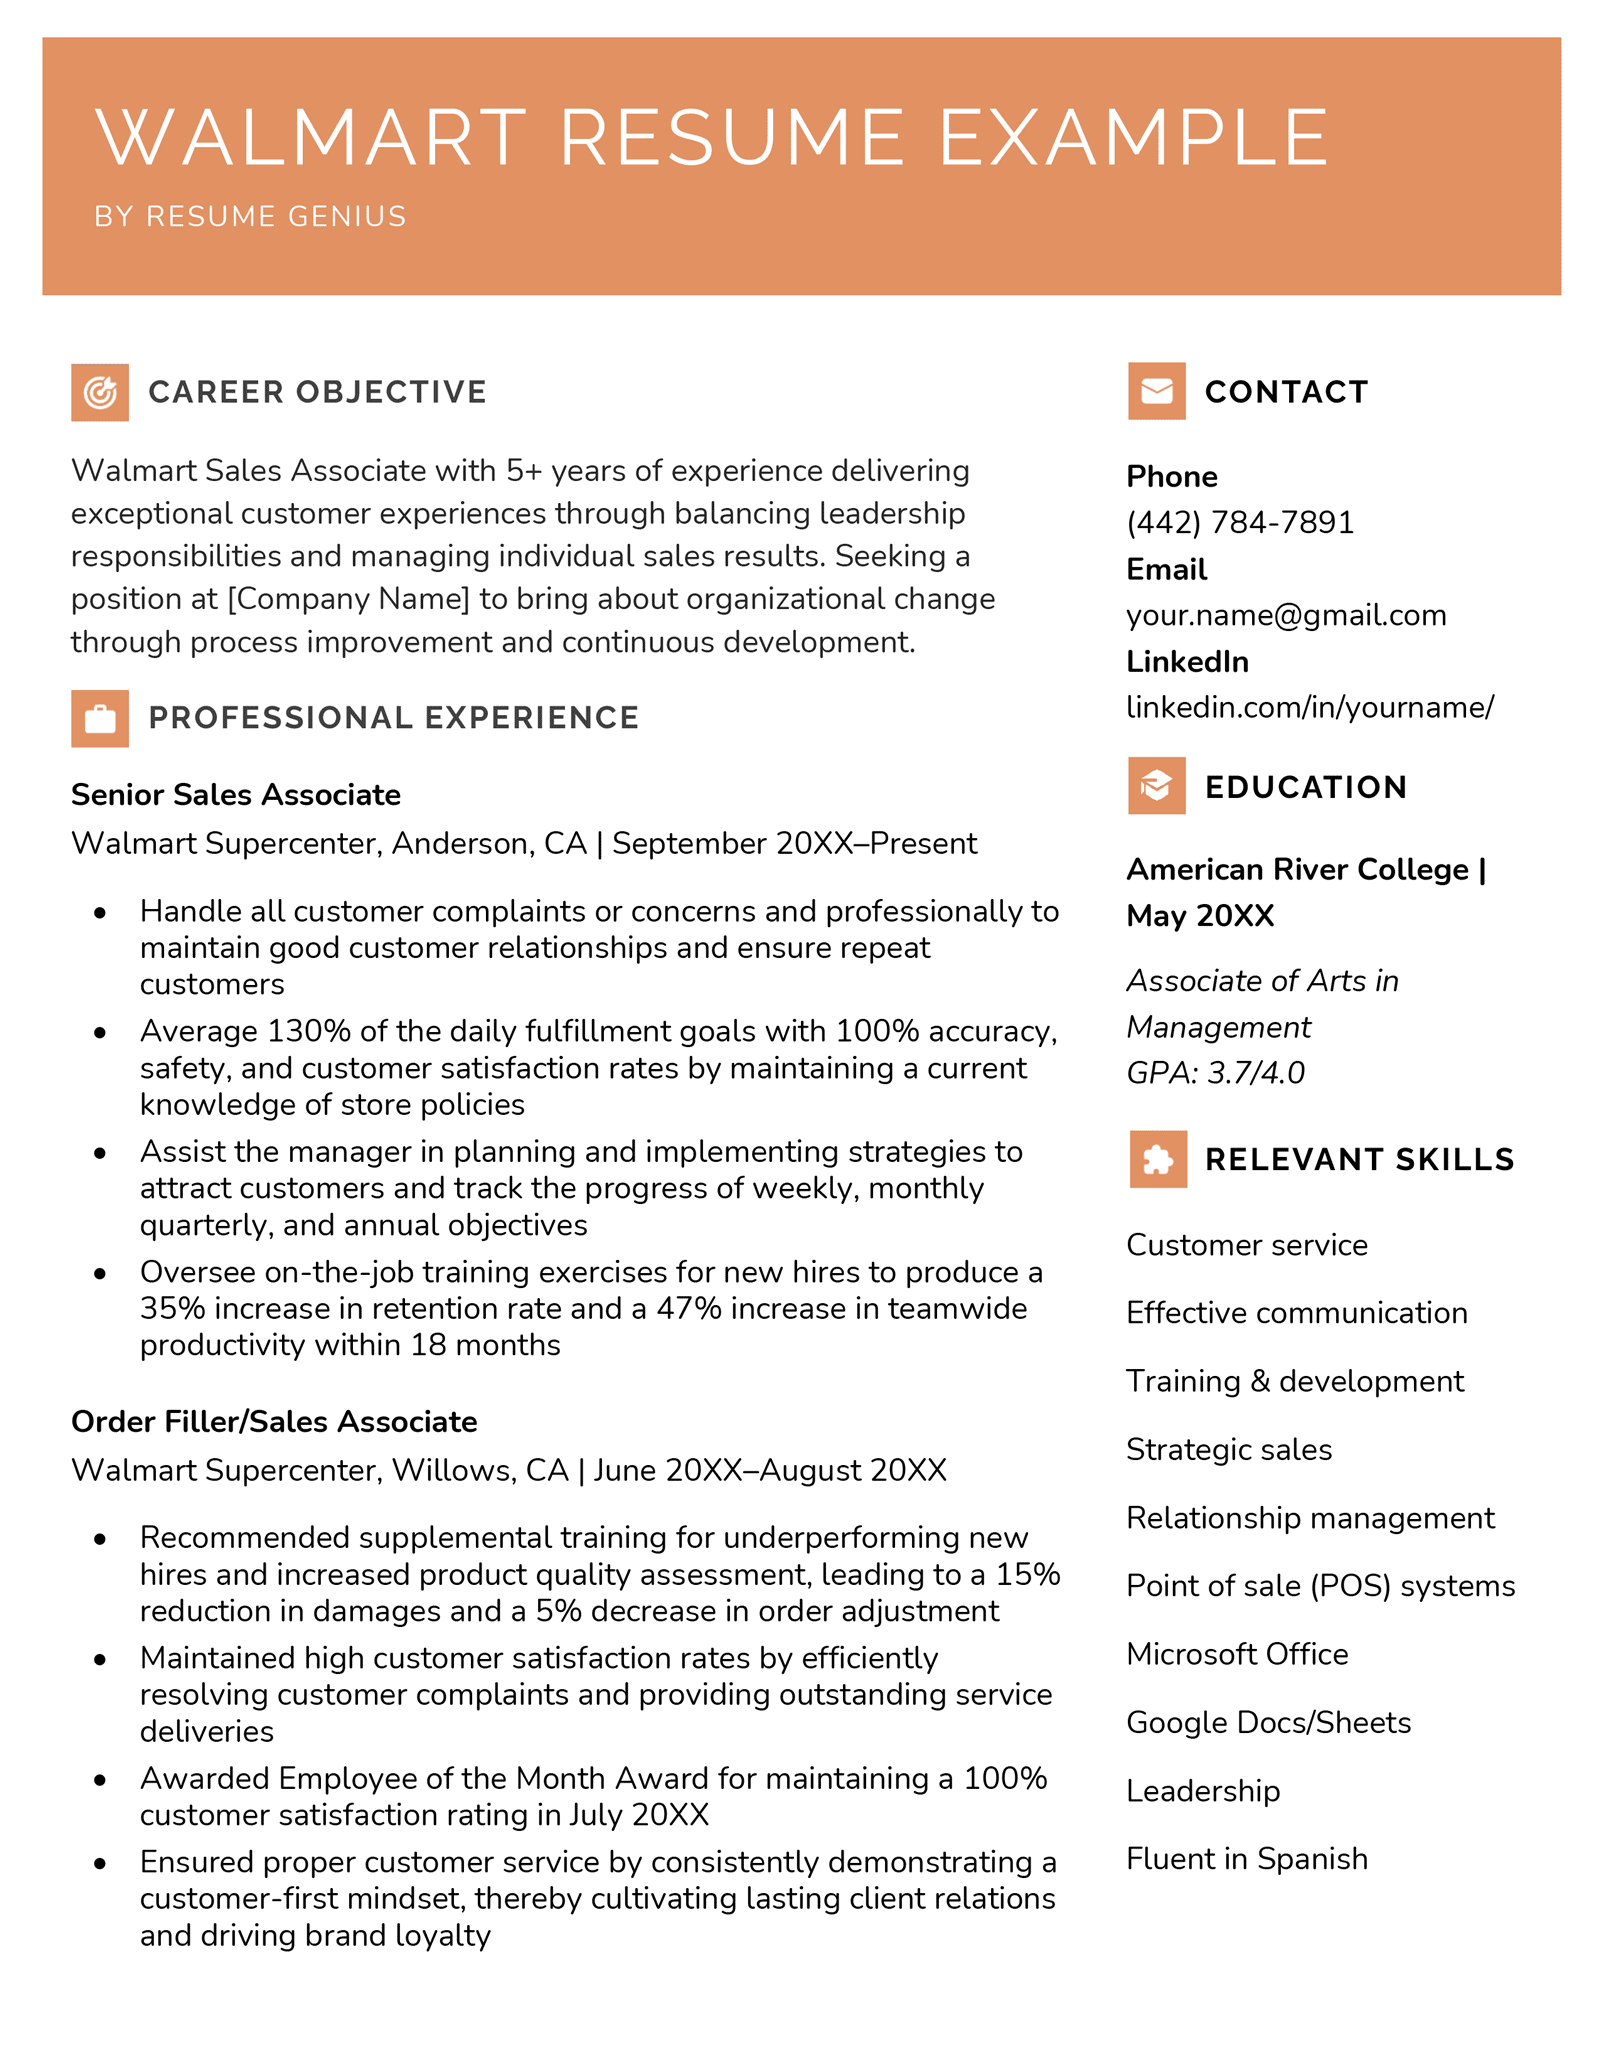 A Walmart resume example with an orange header and resume icons for each section heading